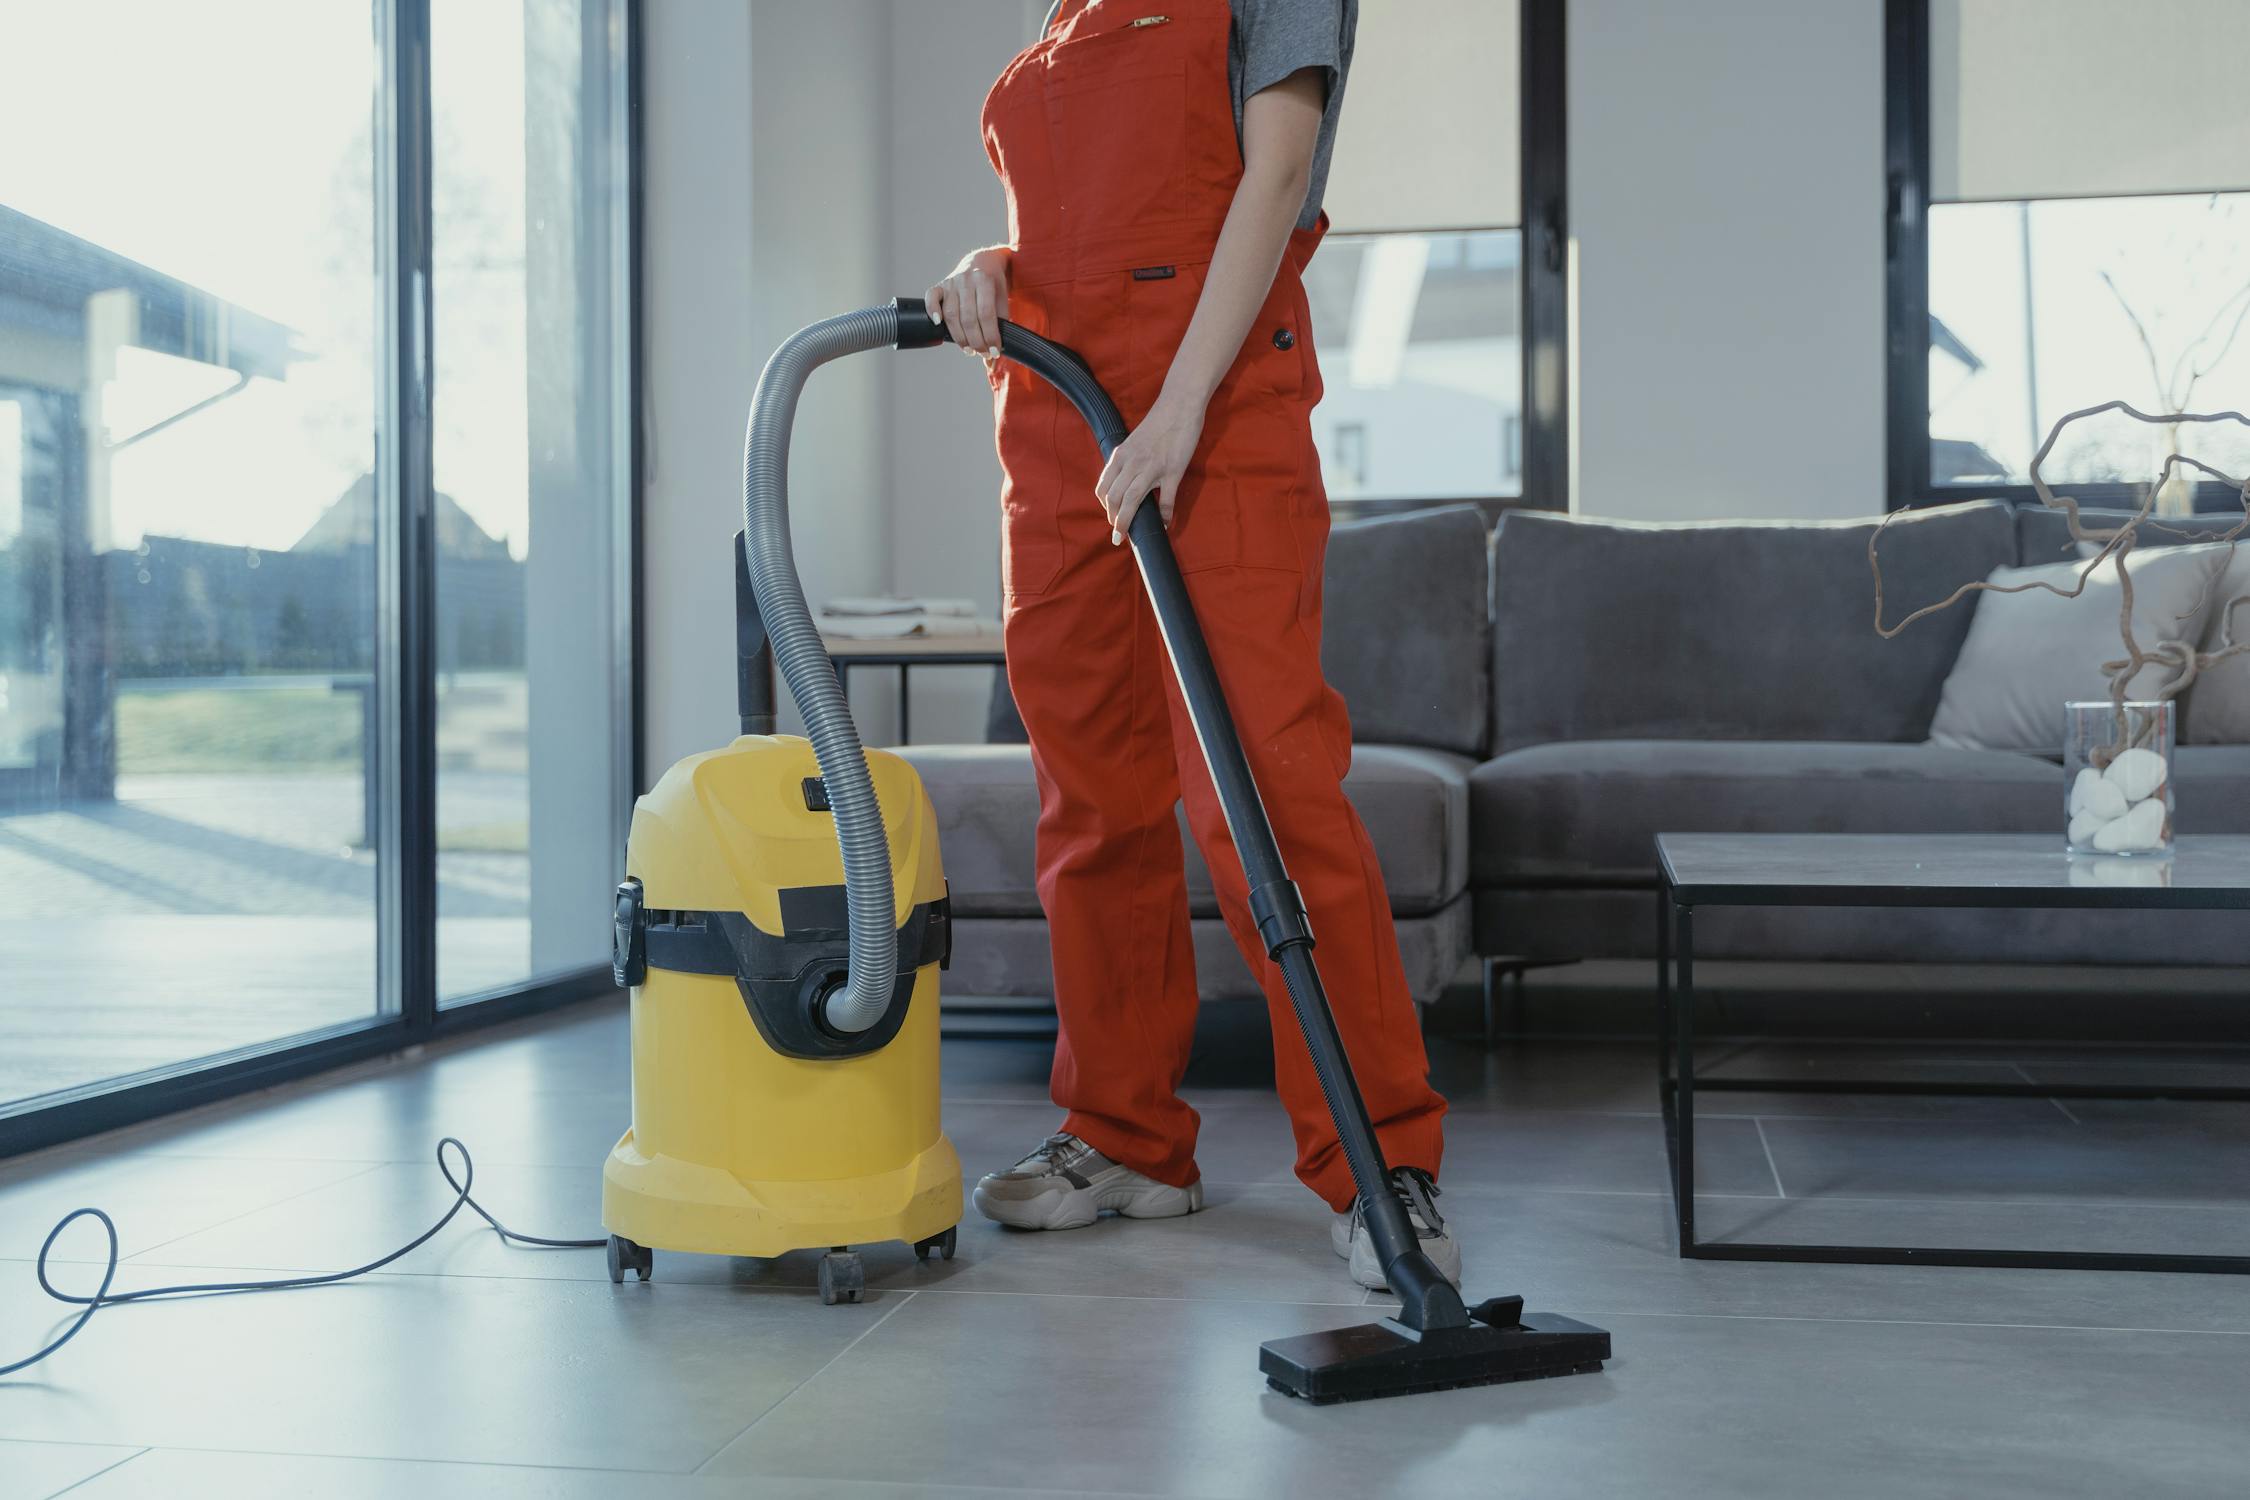 Exhaustive House Cleaning Service in Port Melbourne, Melbourne